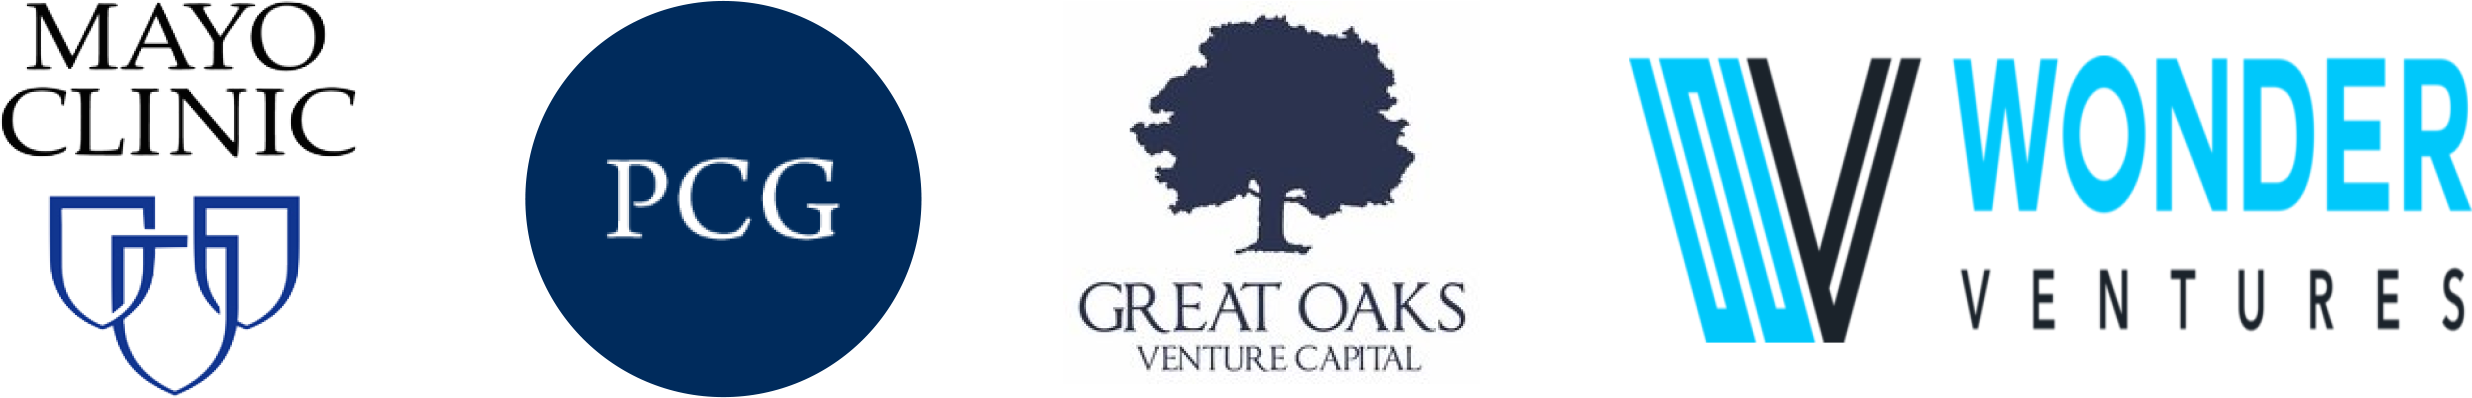 Logos for Mayo Clinic, PCG, Great Oaks Venture Capital, and Wonder Ventures